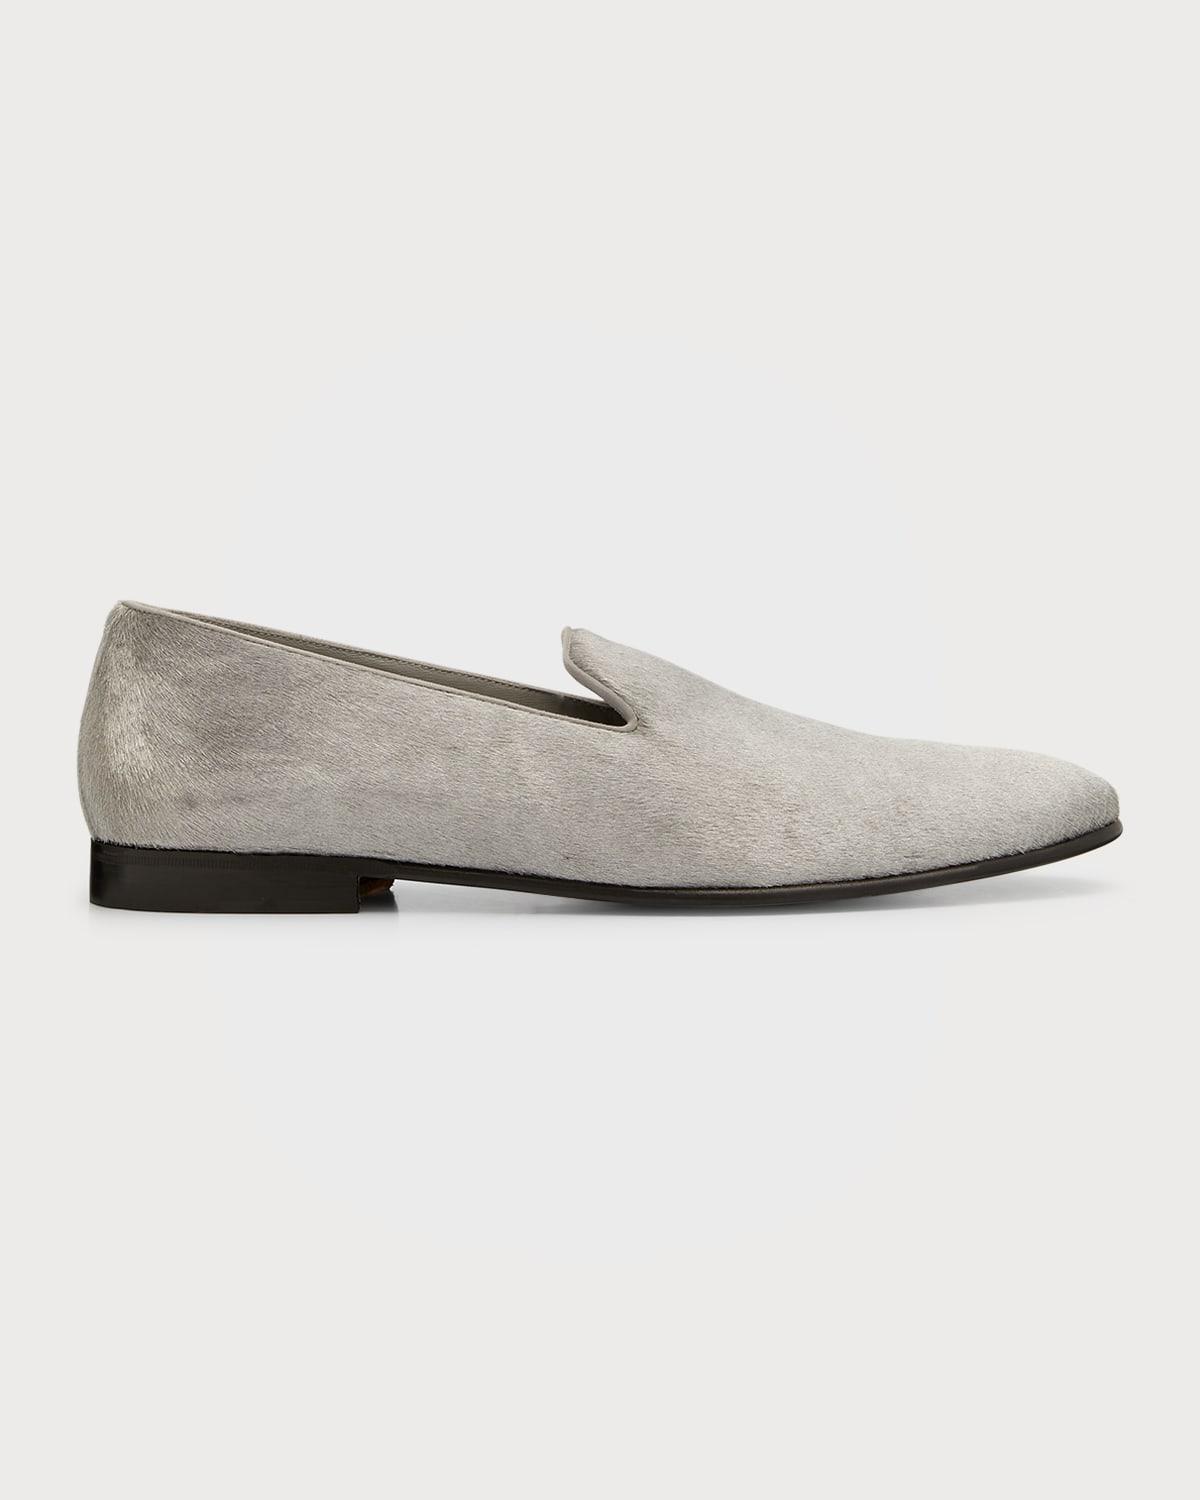 Mens Mario Metallic Suede Loafers Product Image